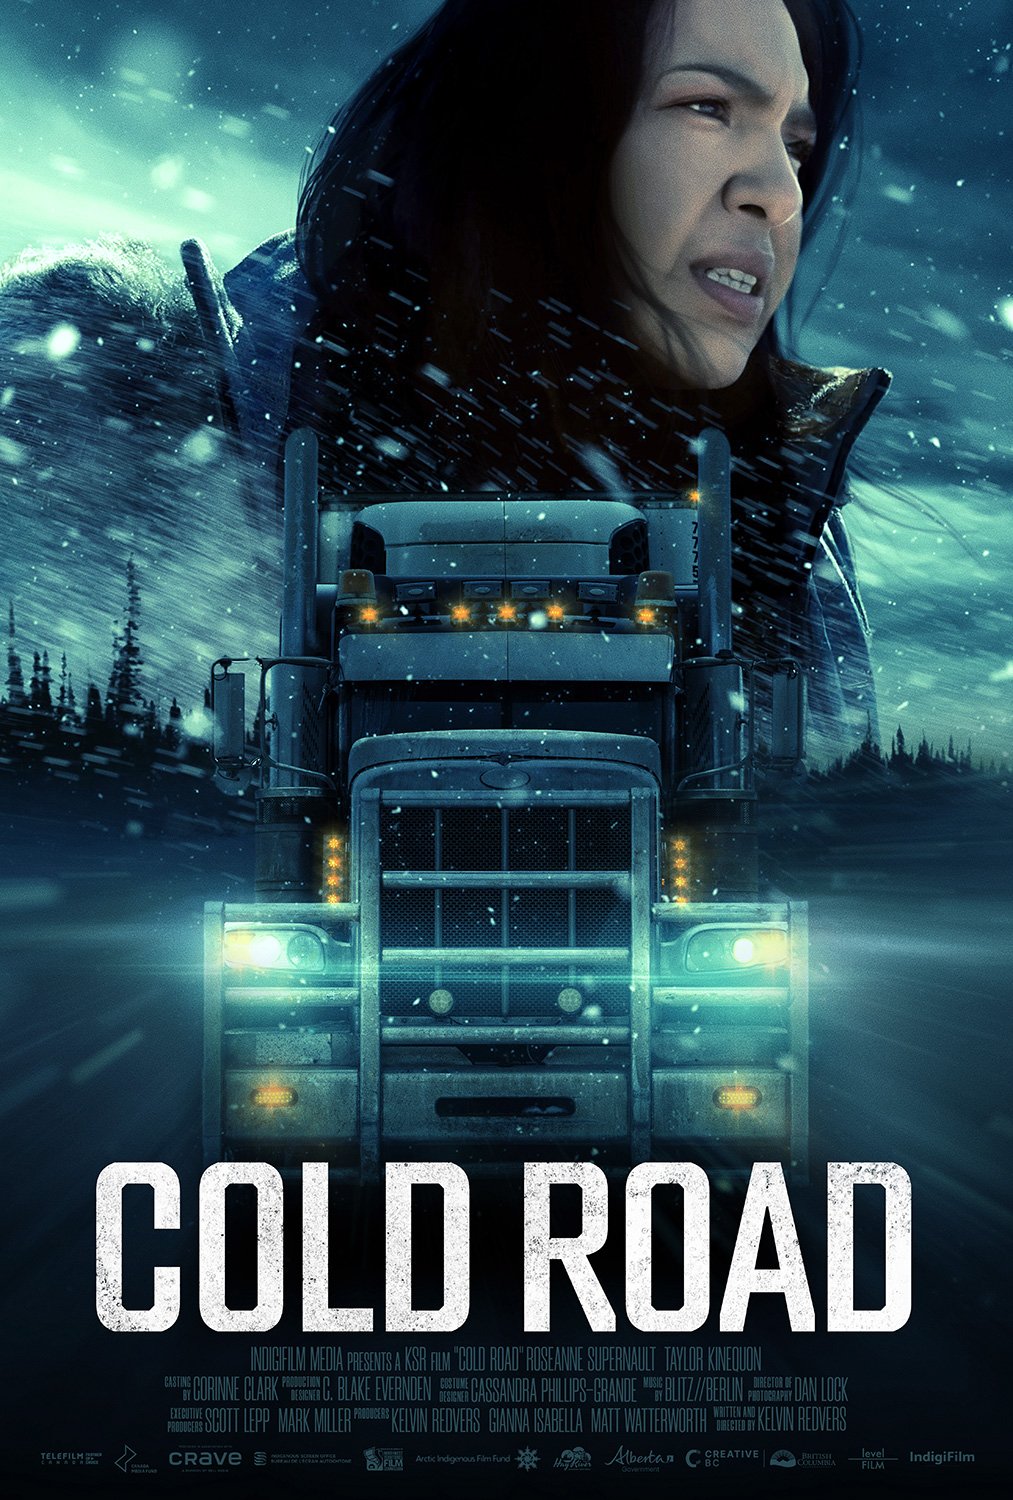 Cold Road movie poster produced by Indigifilm.